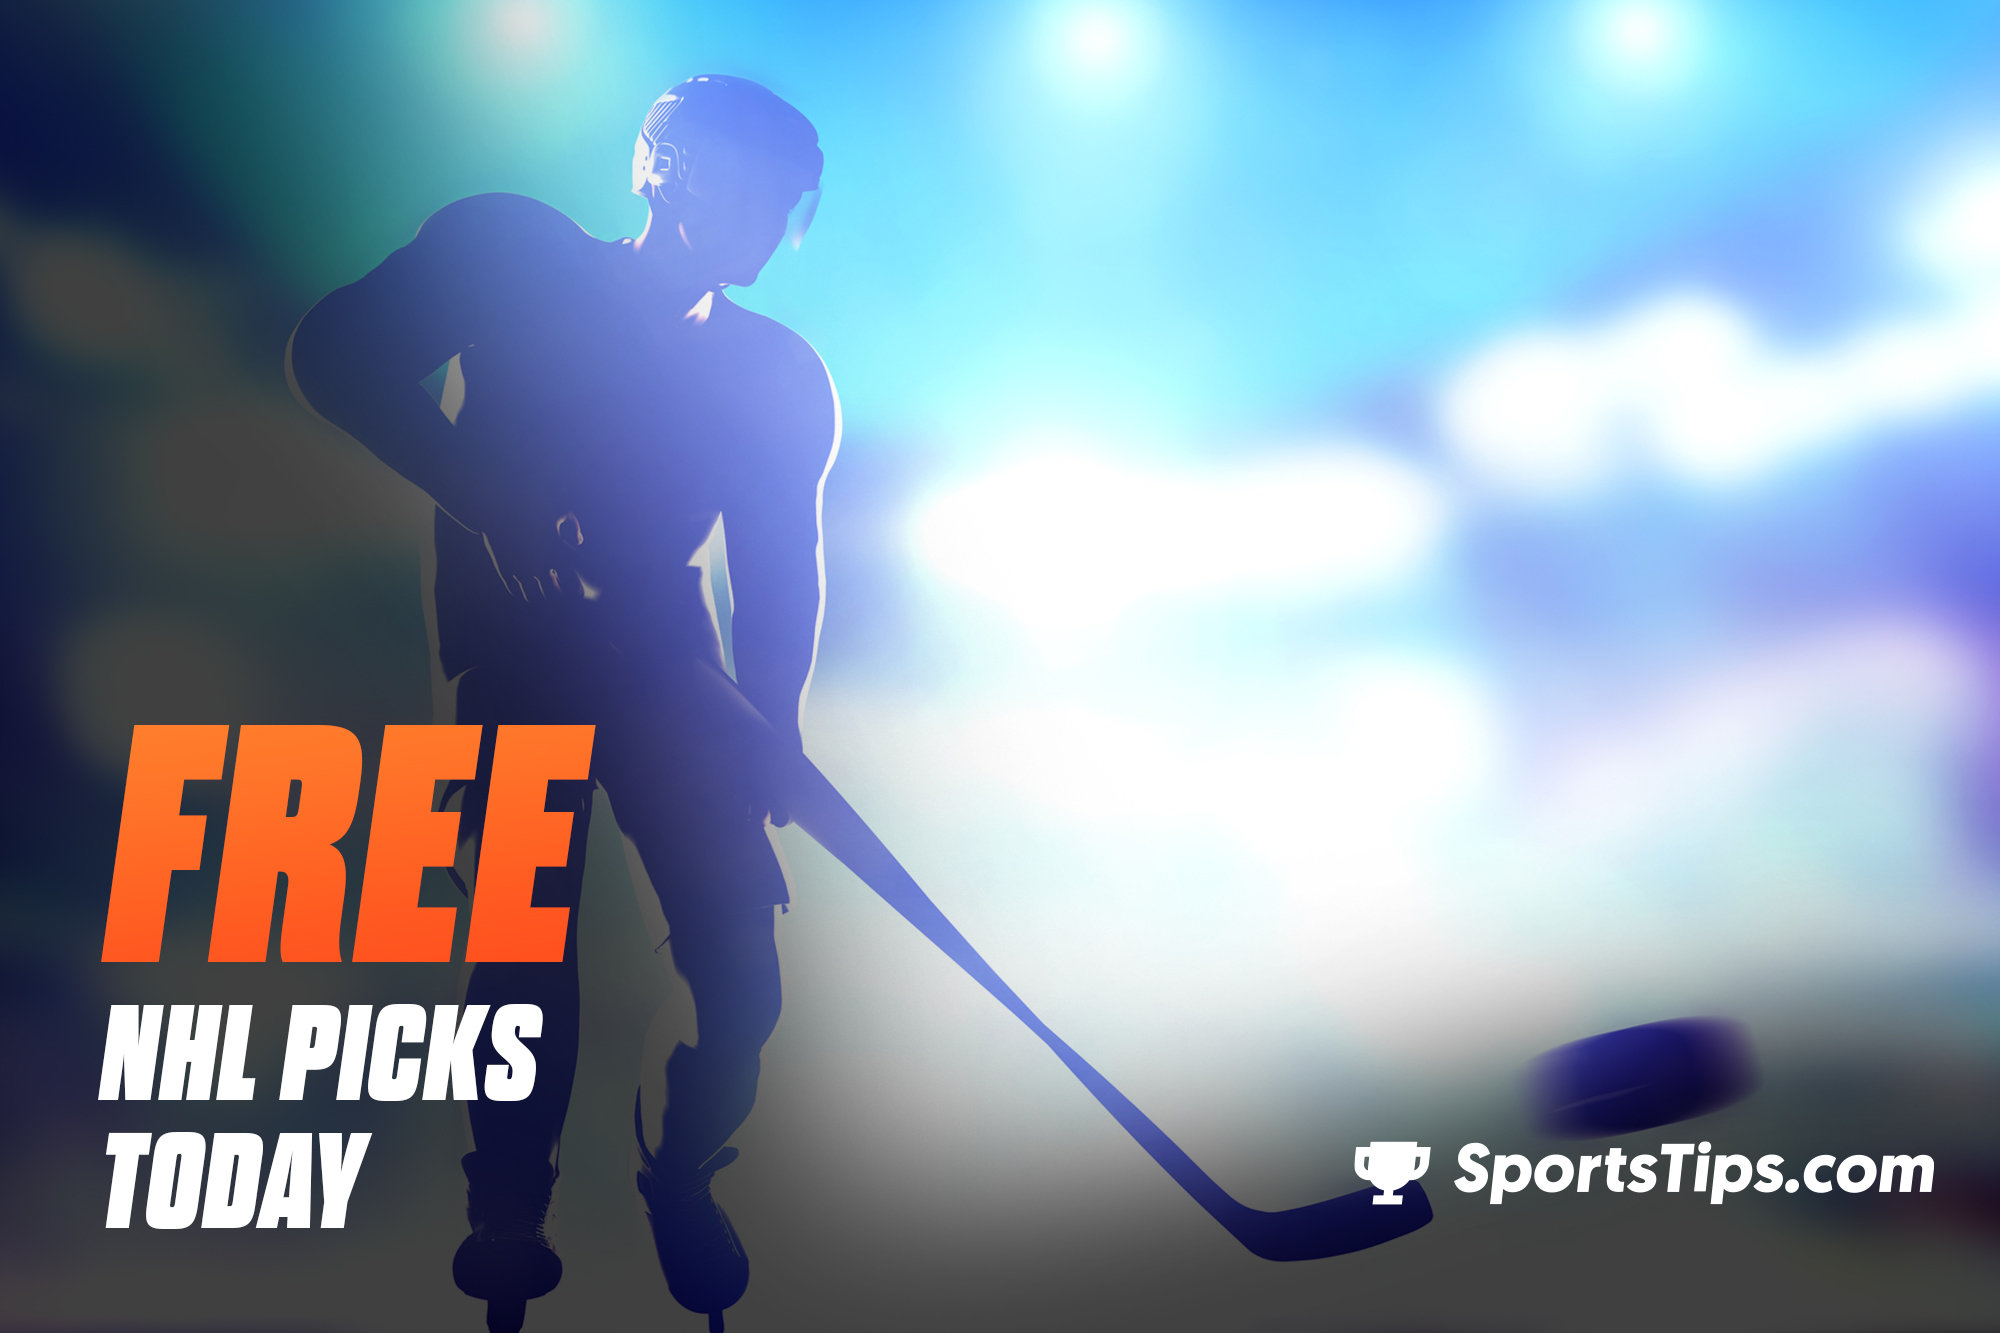 NHL Playoffs Round 2: Free NHL Picks Today for Thursday, June 3rd, 2021